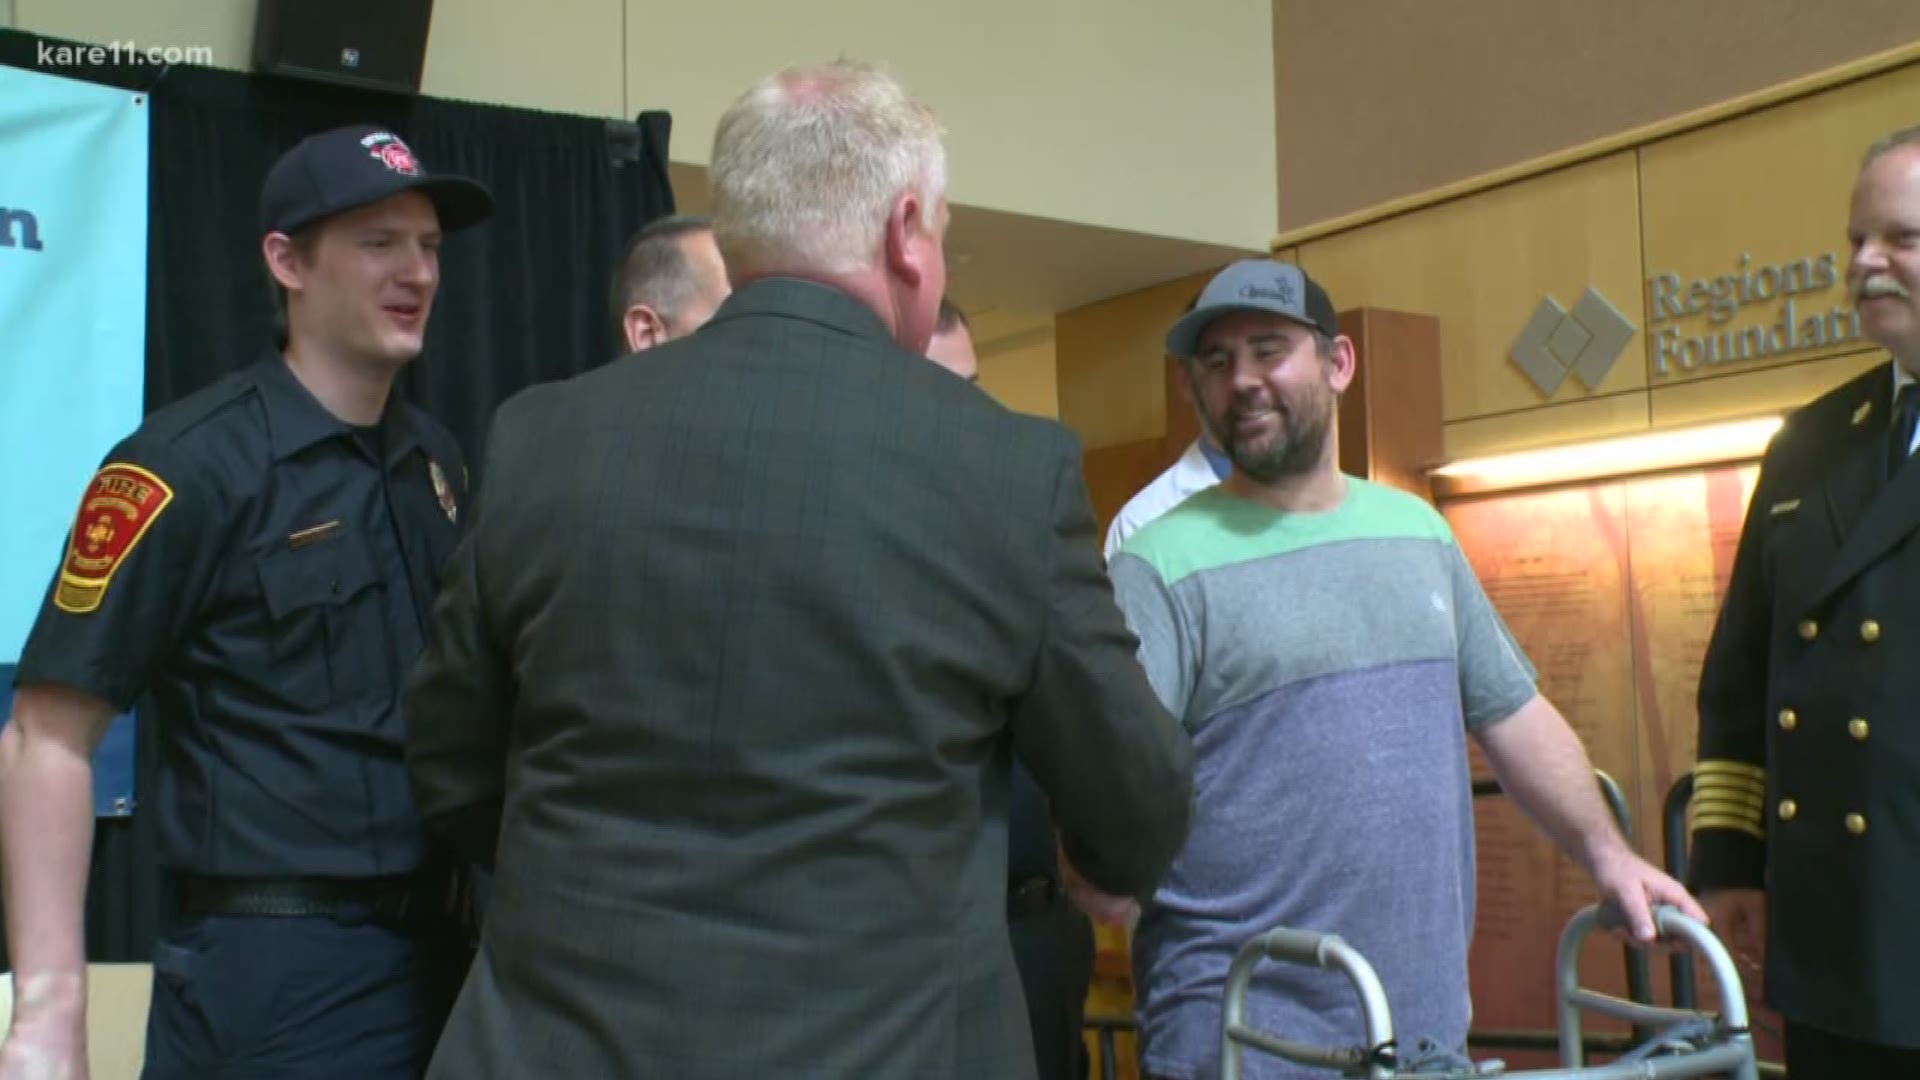 A Plymouth man involved in a train accident earlier this year was able to thank the first responders who helped save his life. https://kare11.tv/2s1k61T